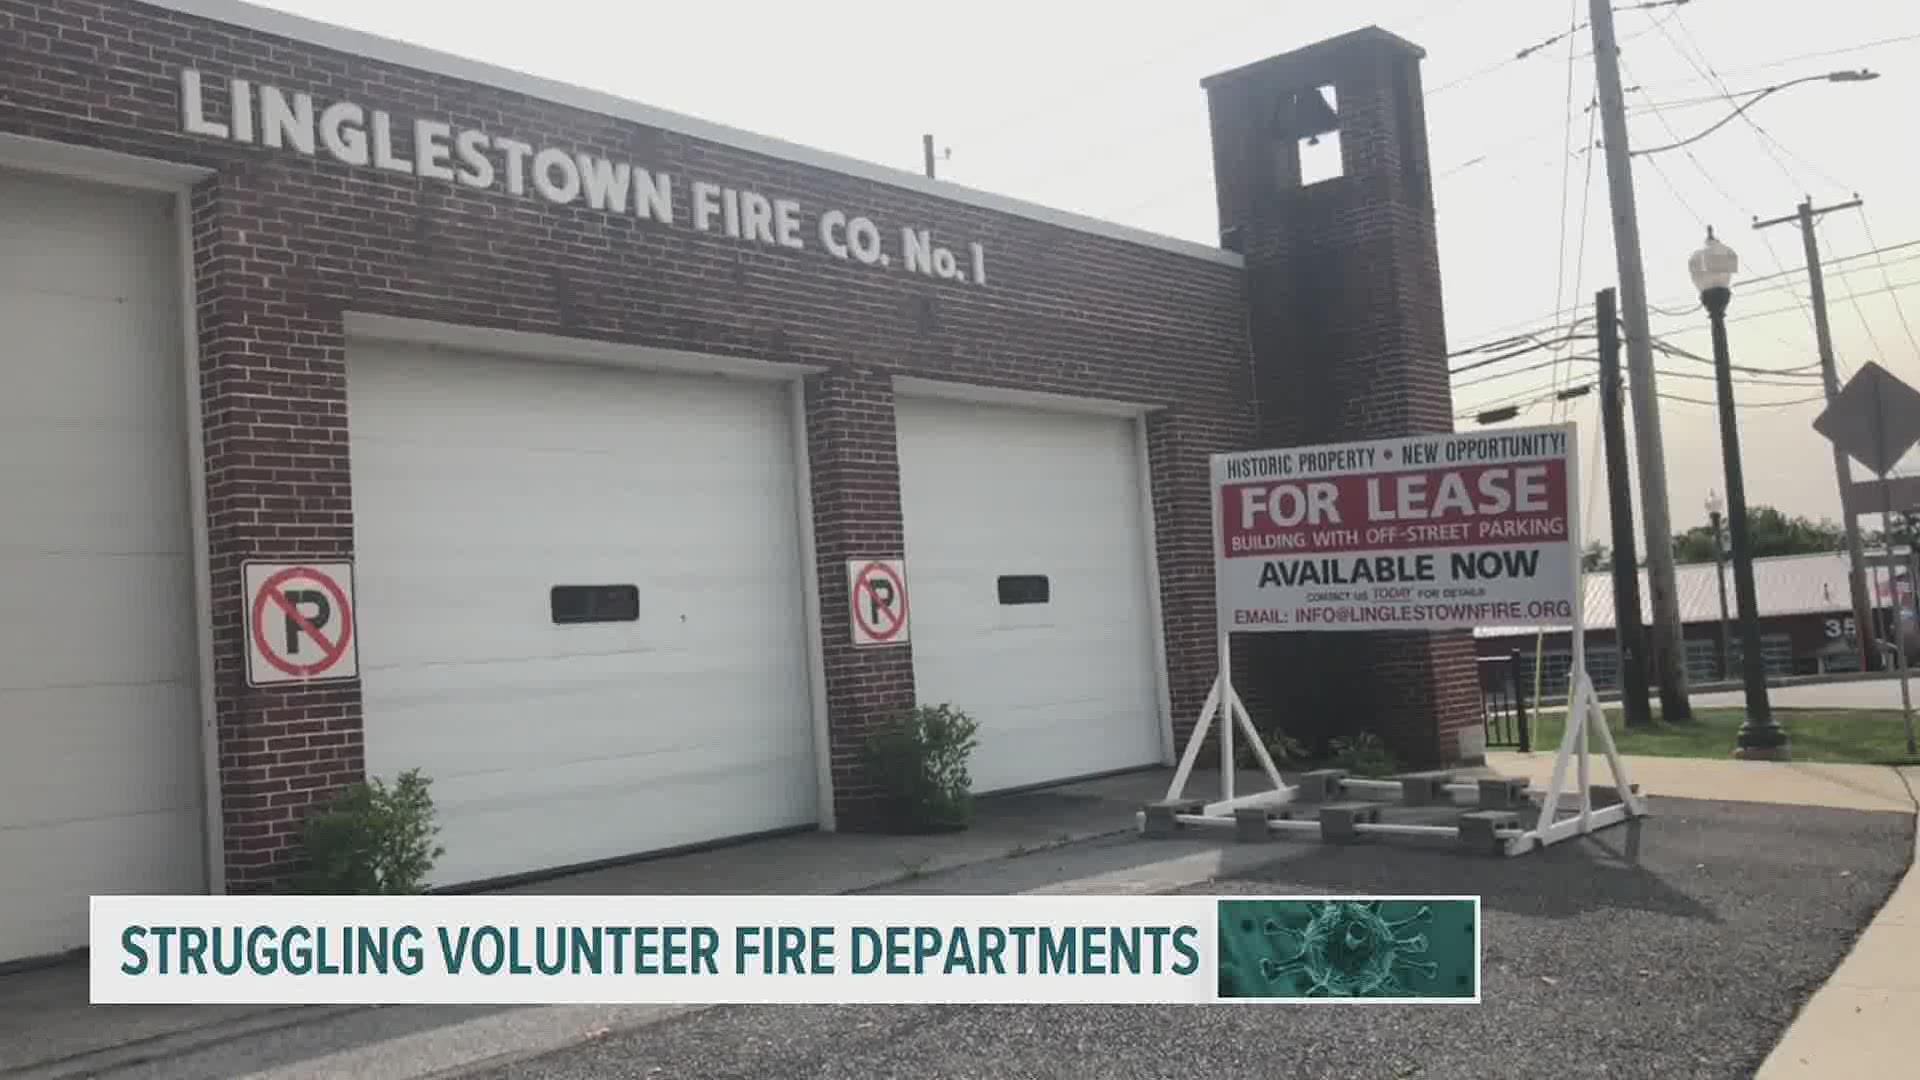 Renting out will only enhance fire services, company president tells FOX43